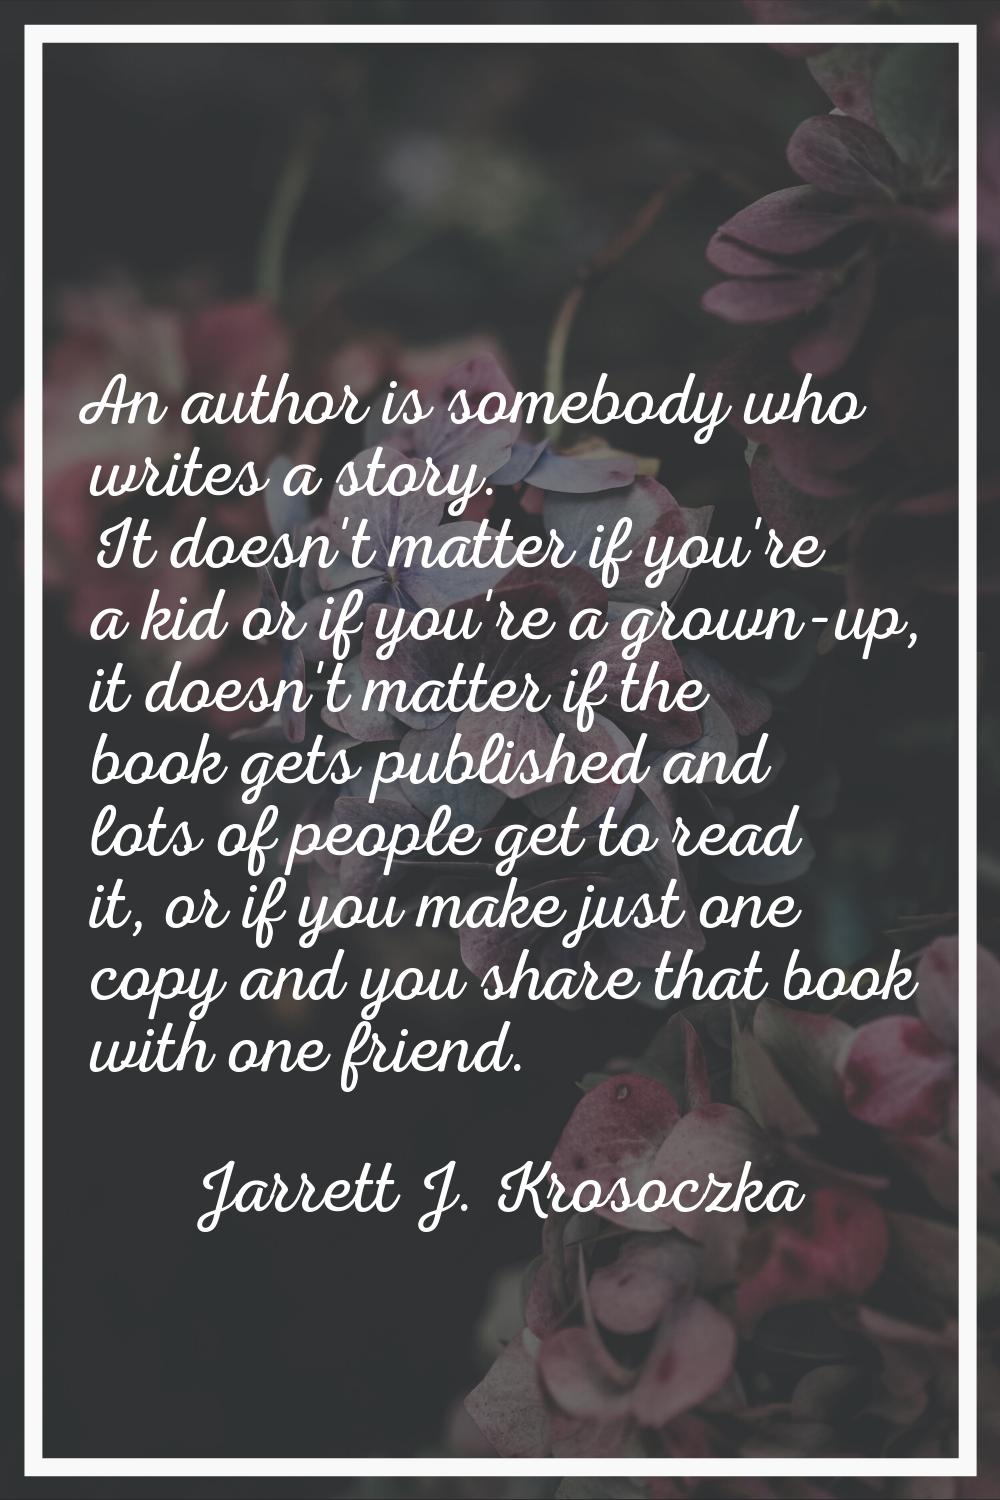 An author is somebody who writes a story. It doesn't matter if you're a kid or if you're a grown-up